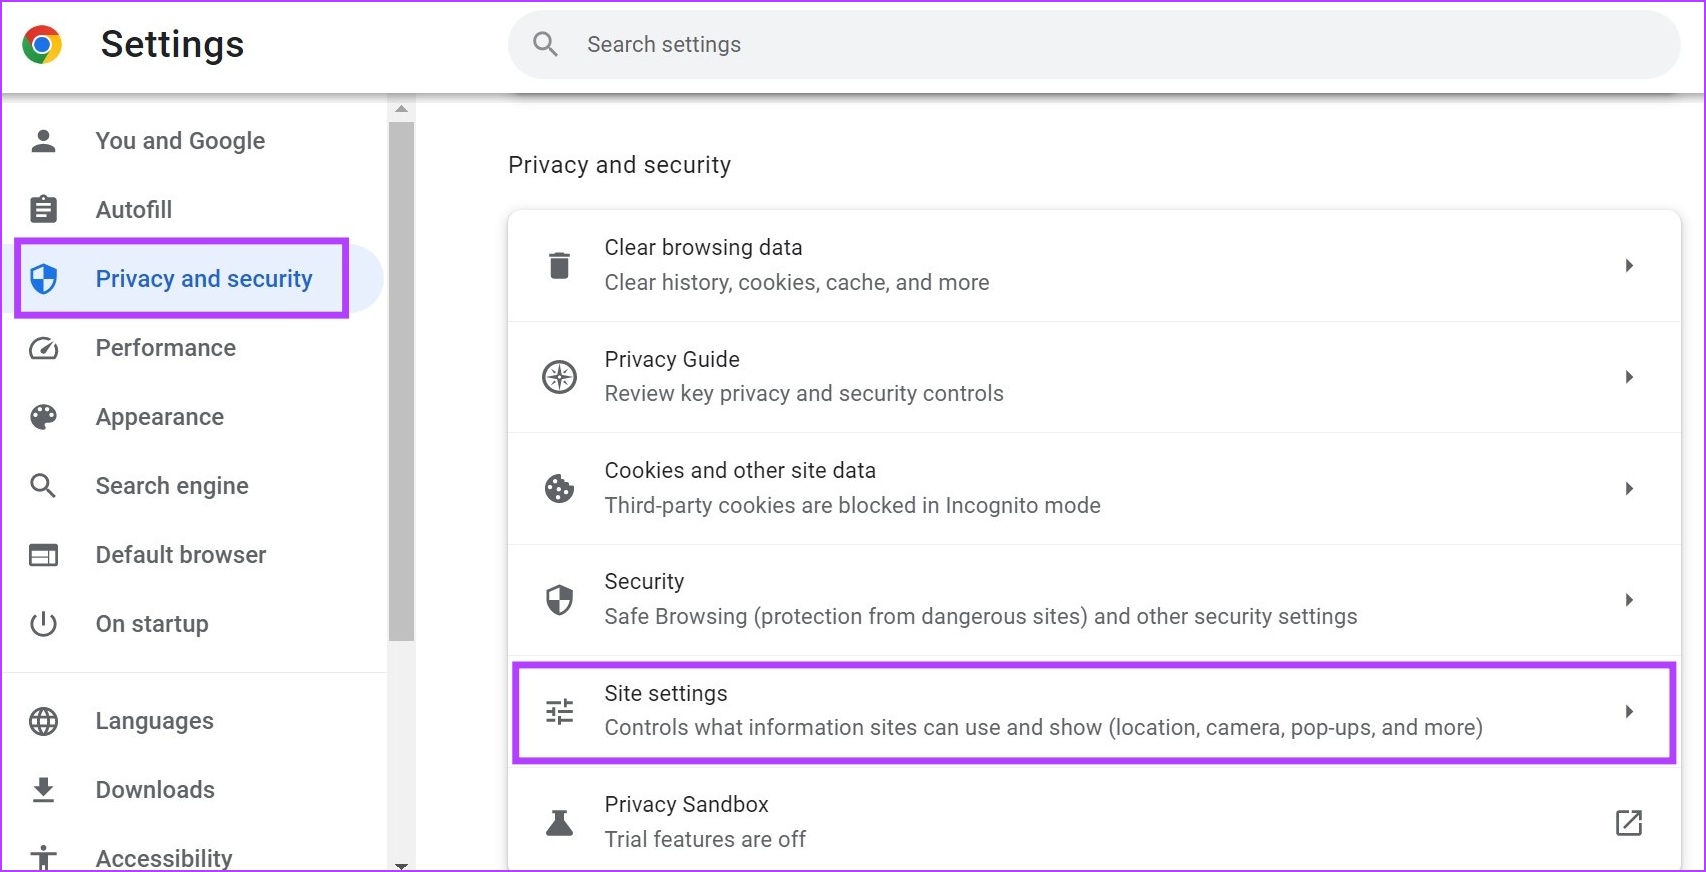 Open Privacy settings & click on Site settings